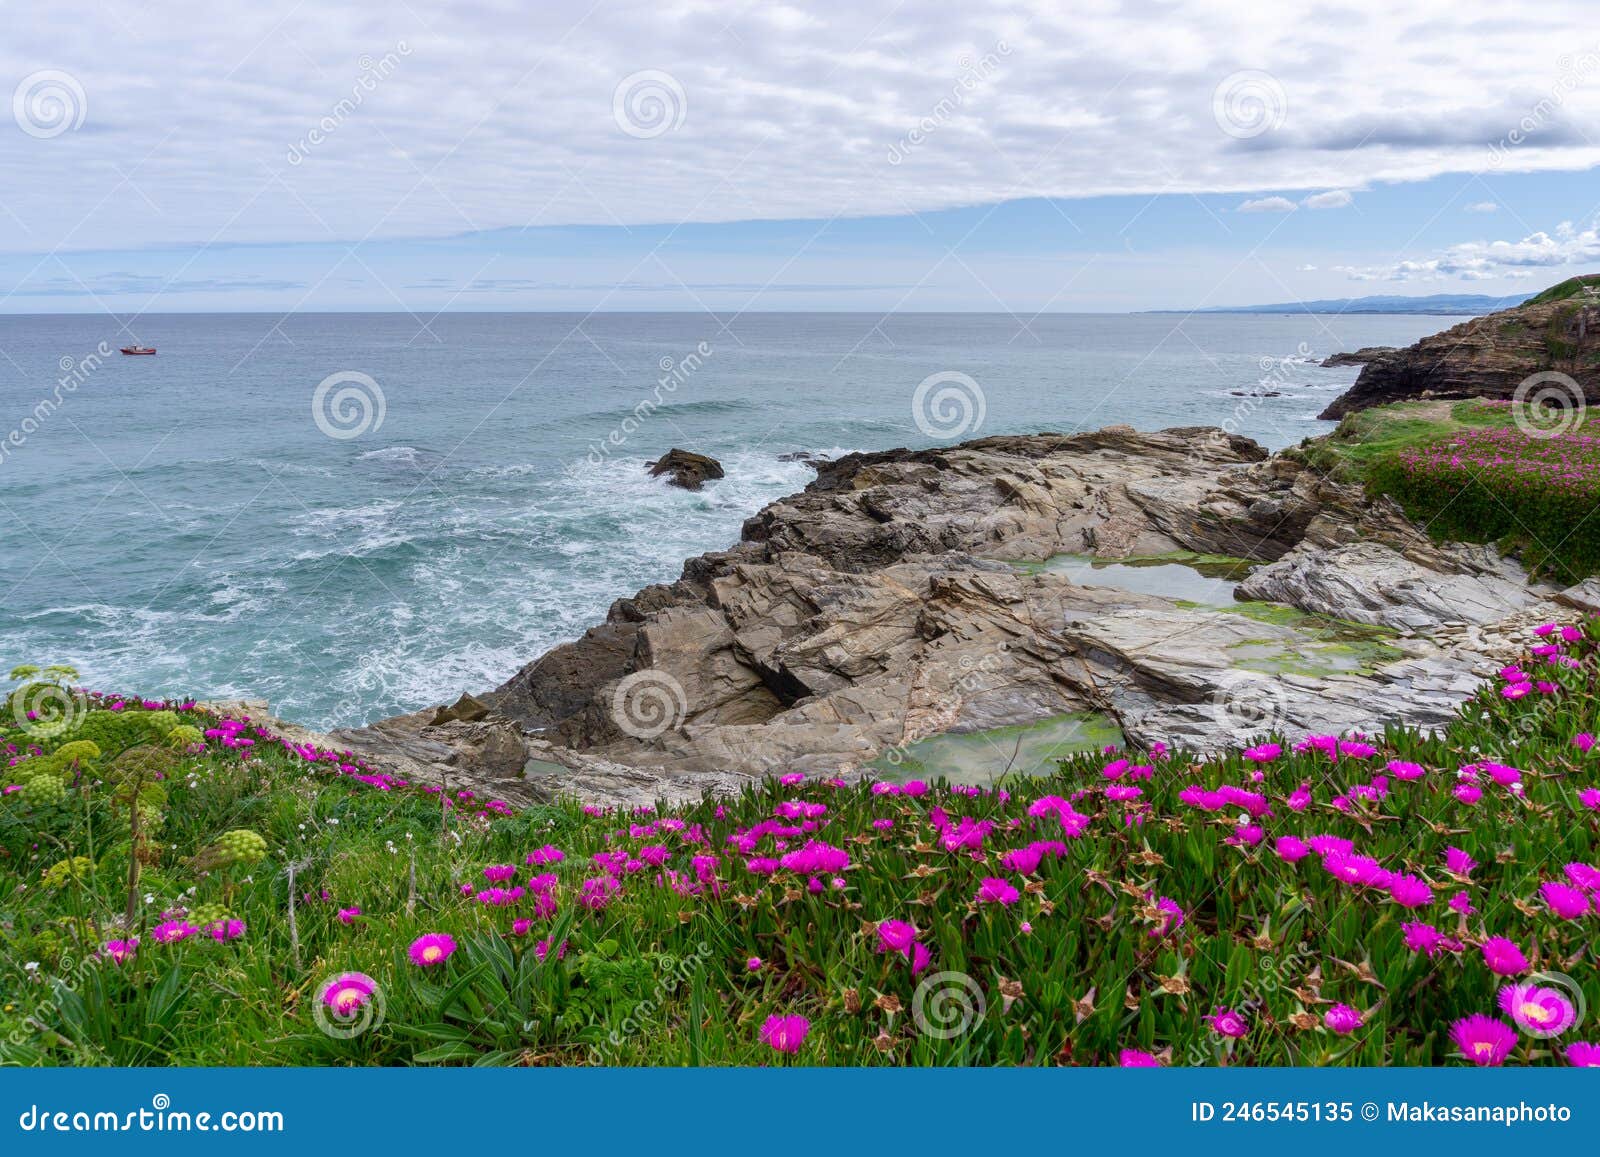 idyllic rocky cove with blossoming flowers on the coast of galicia with tidal pools in the foreground